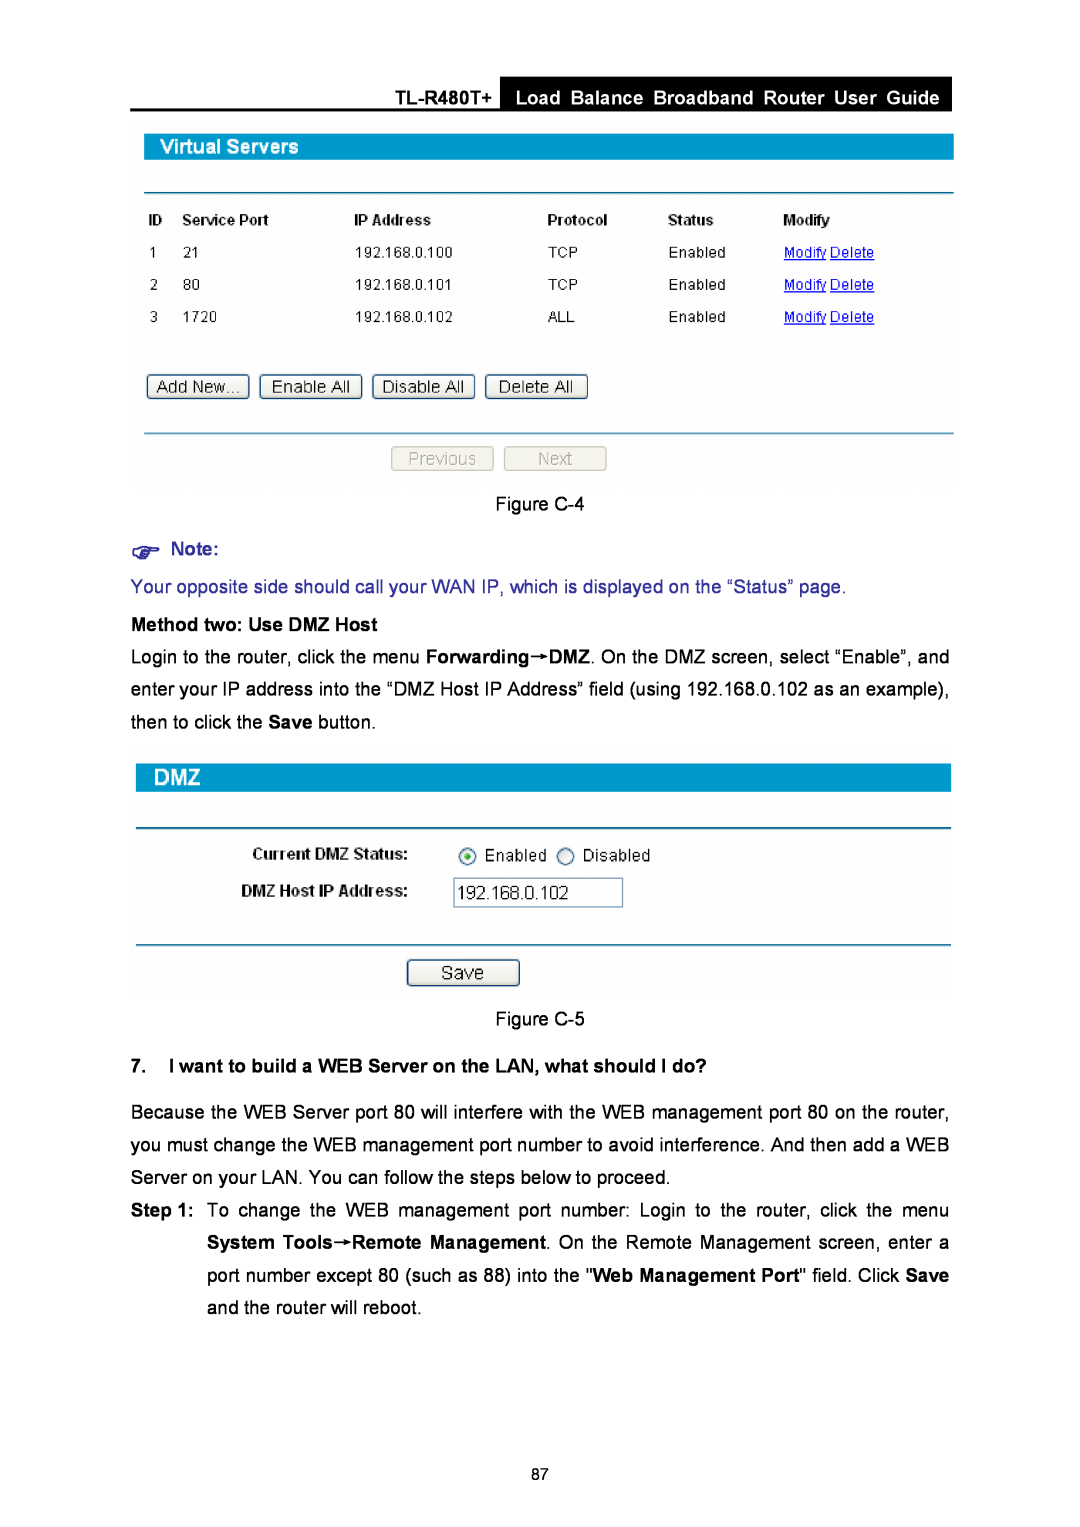 TP-Link TL-R480T+ manual Load Balance Broadband Router User Guide, Figure C-4, Method two Use DMZ Host 